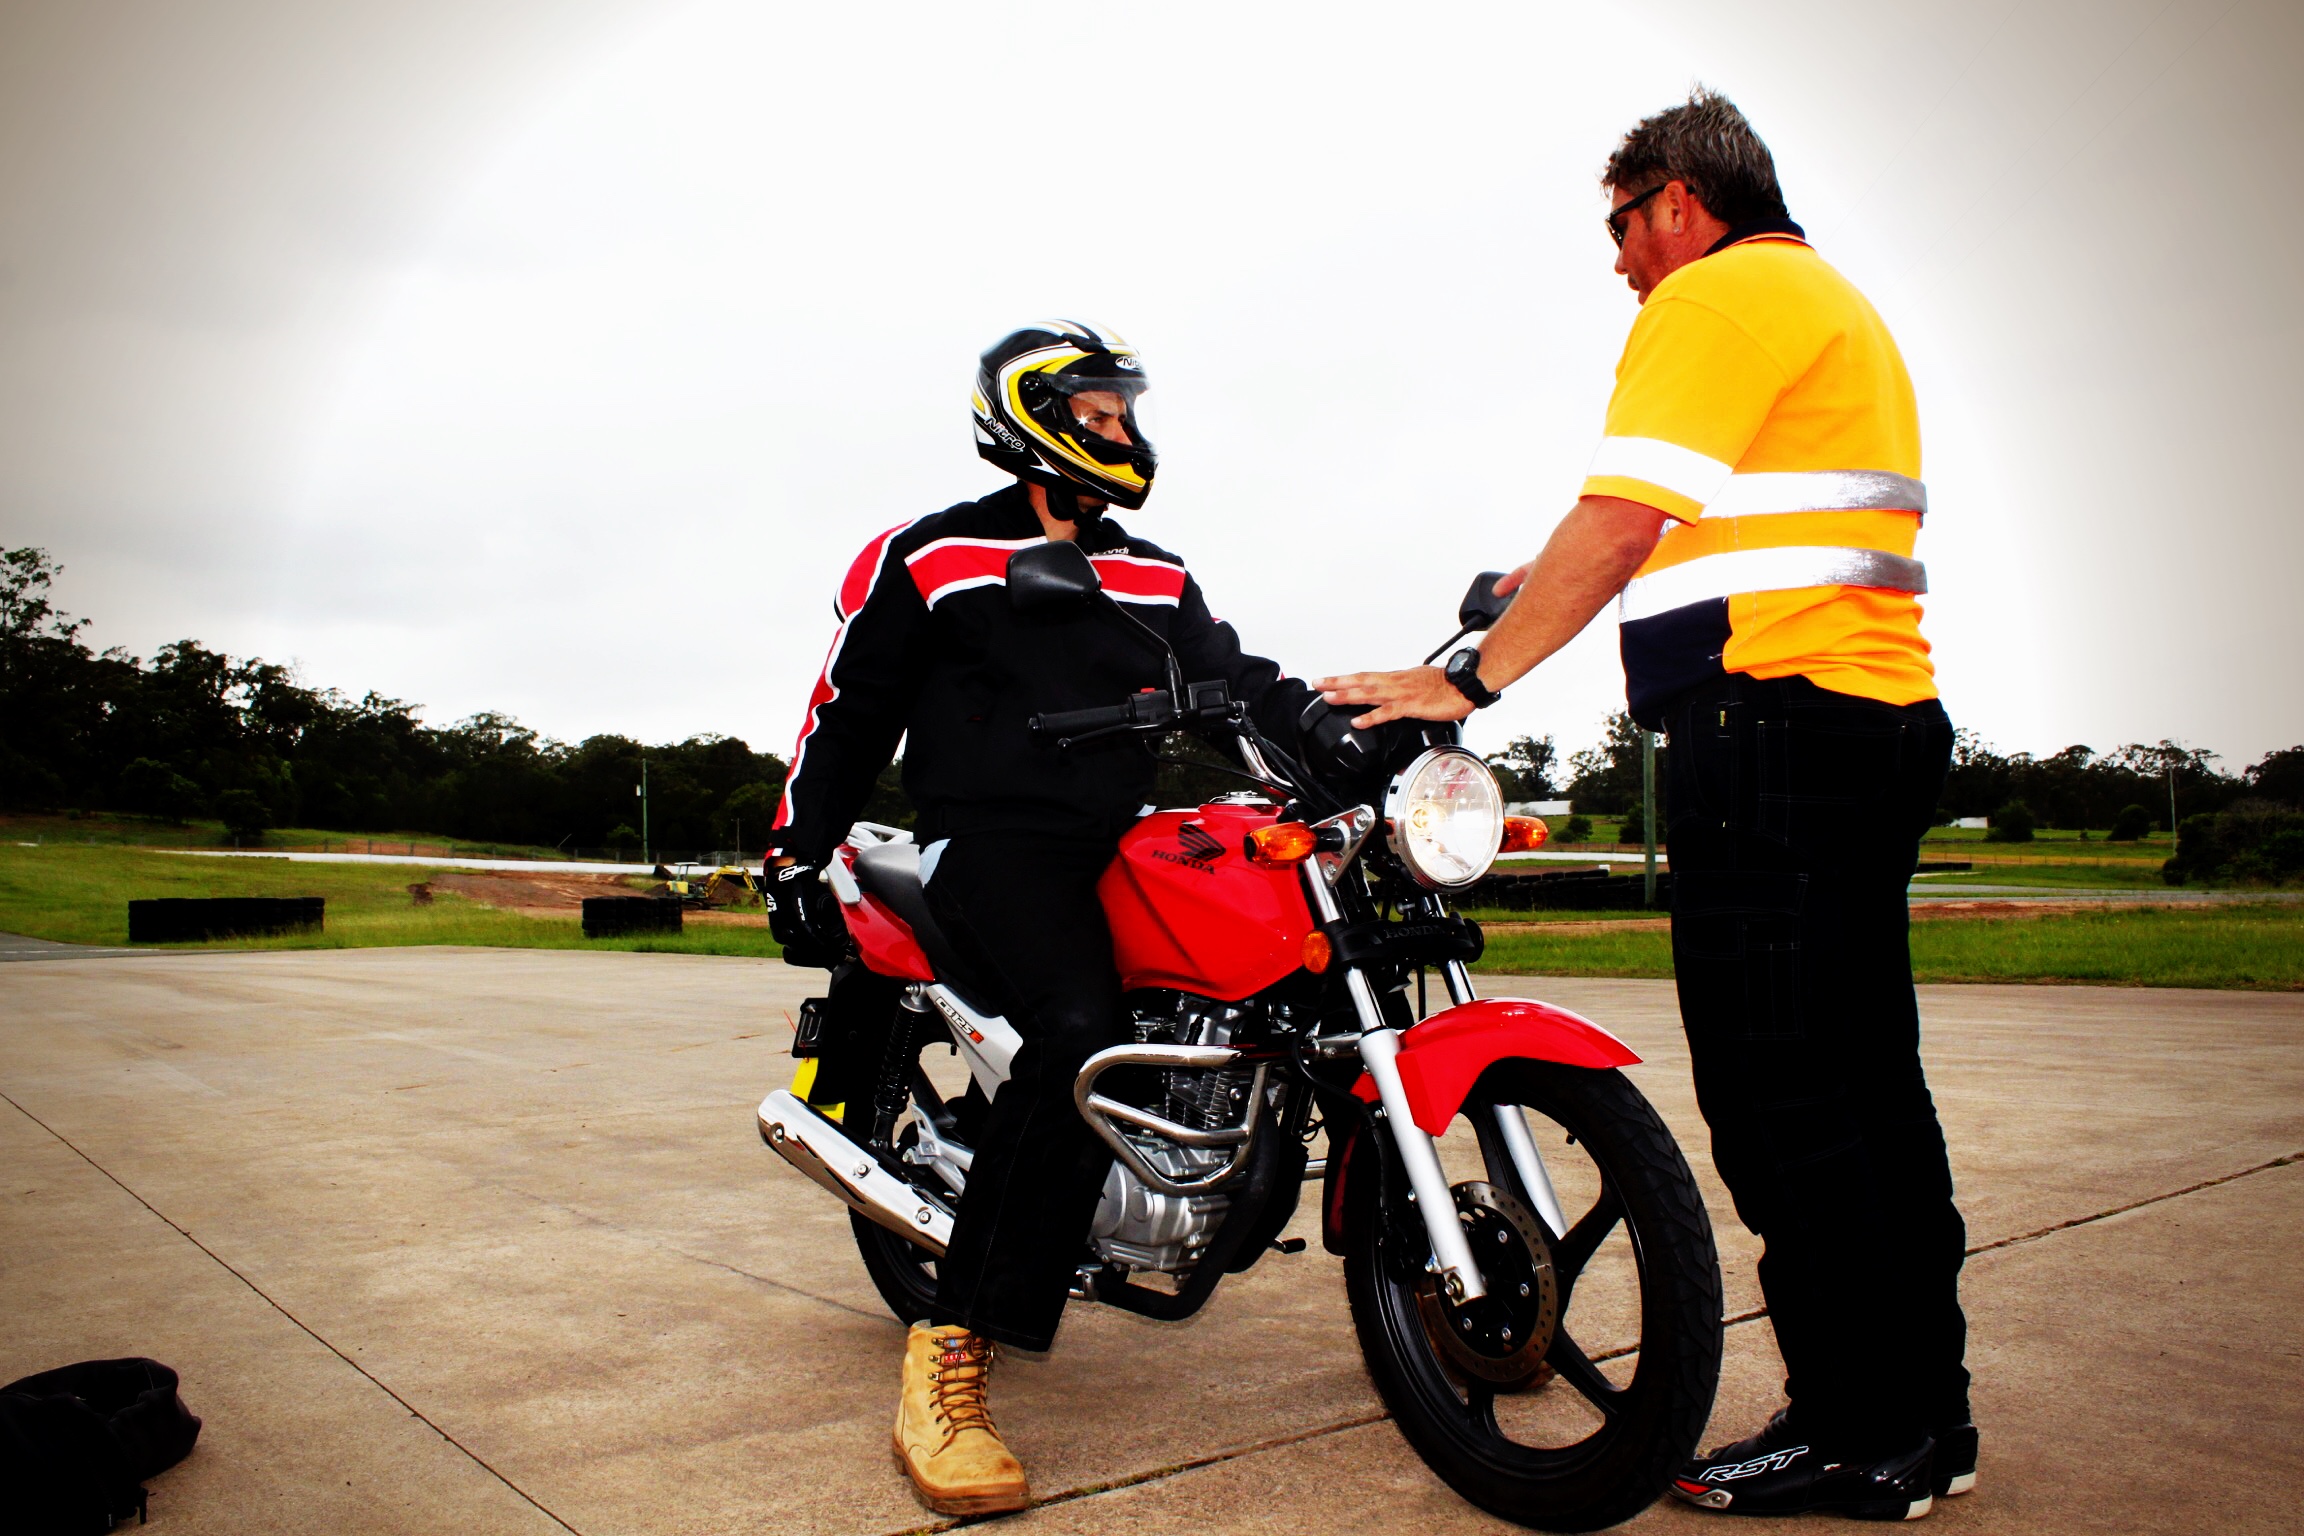 How to get a motorcycle licence in Queensland Qld.